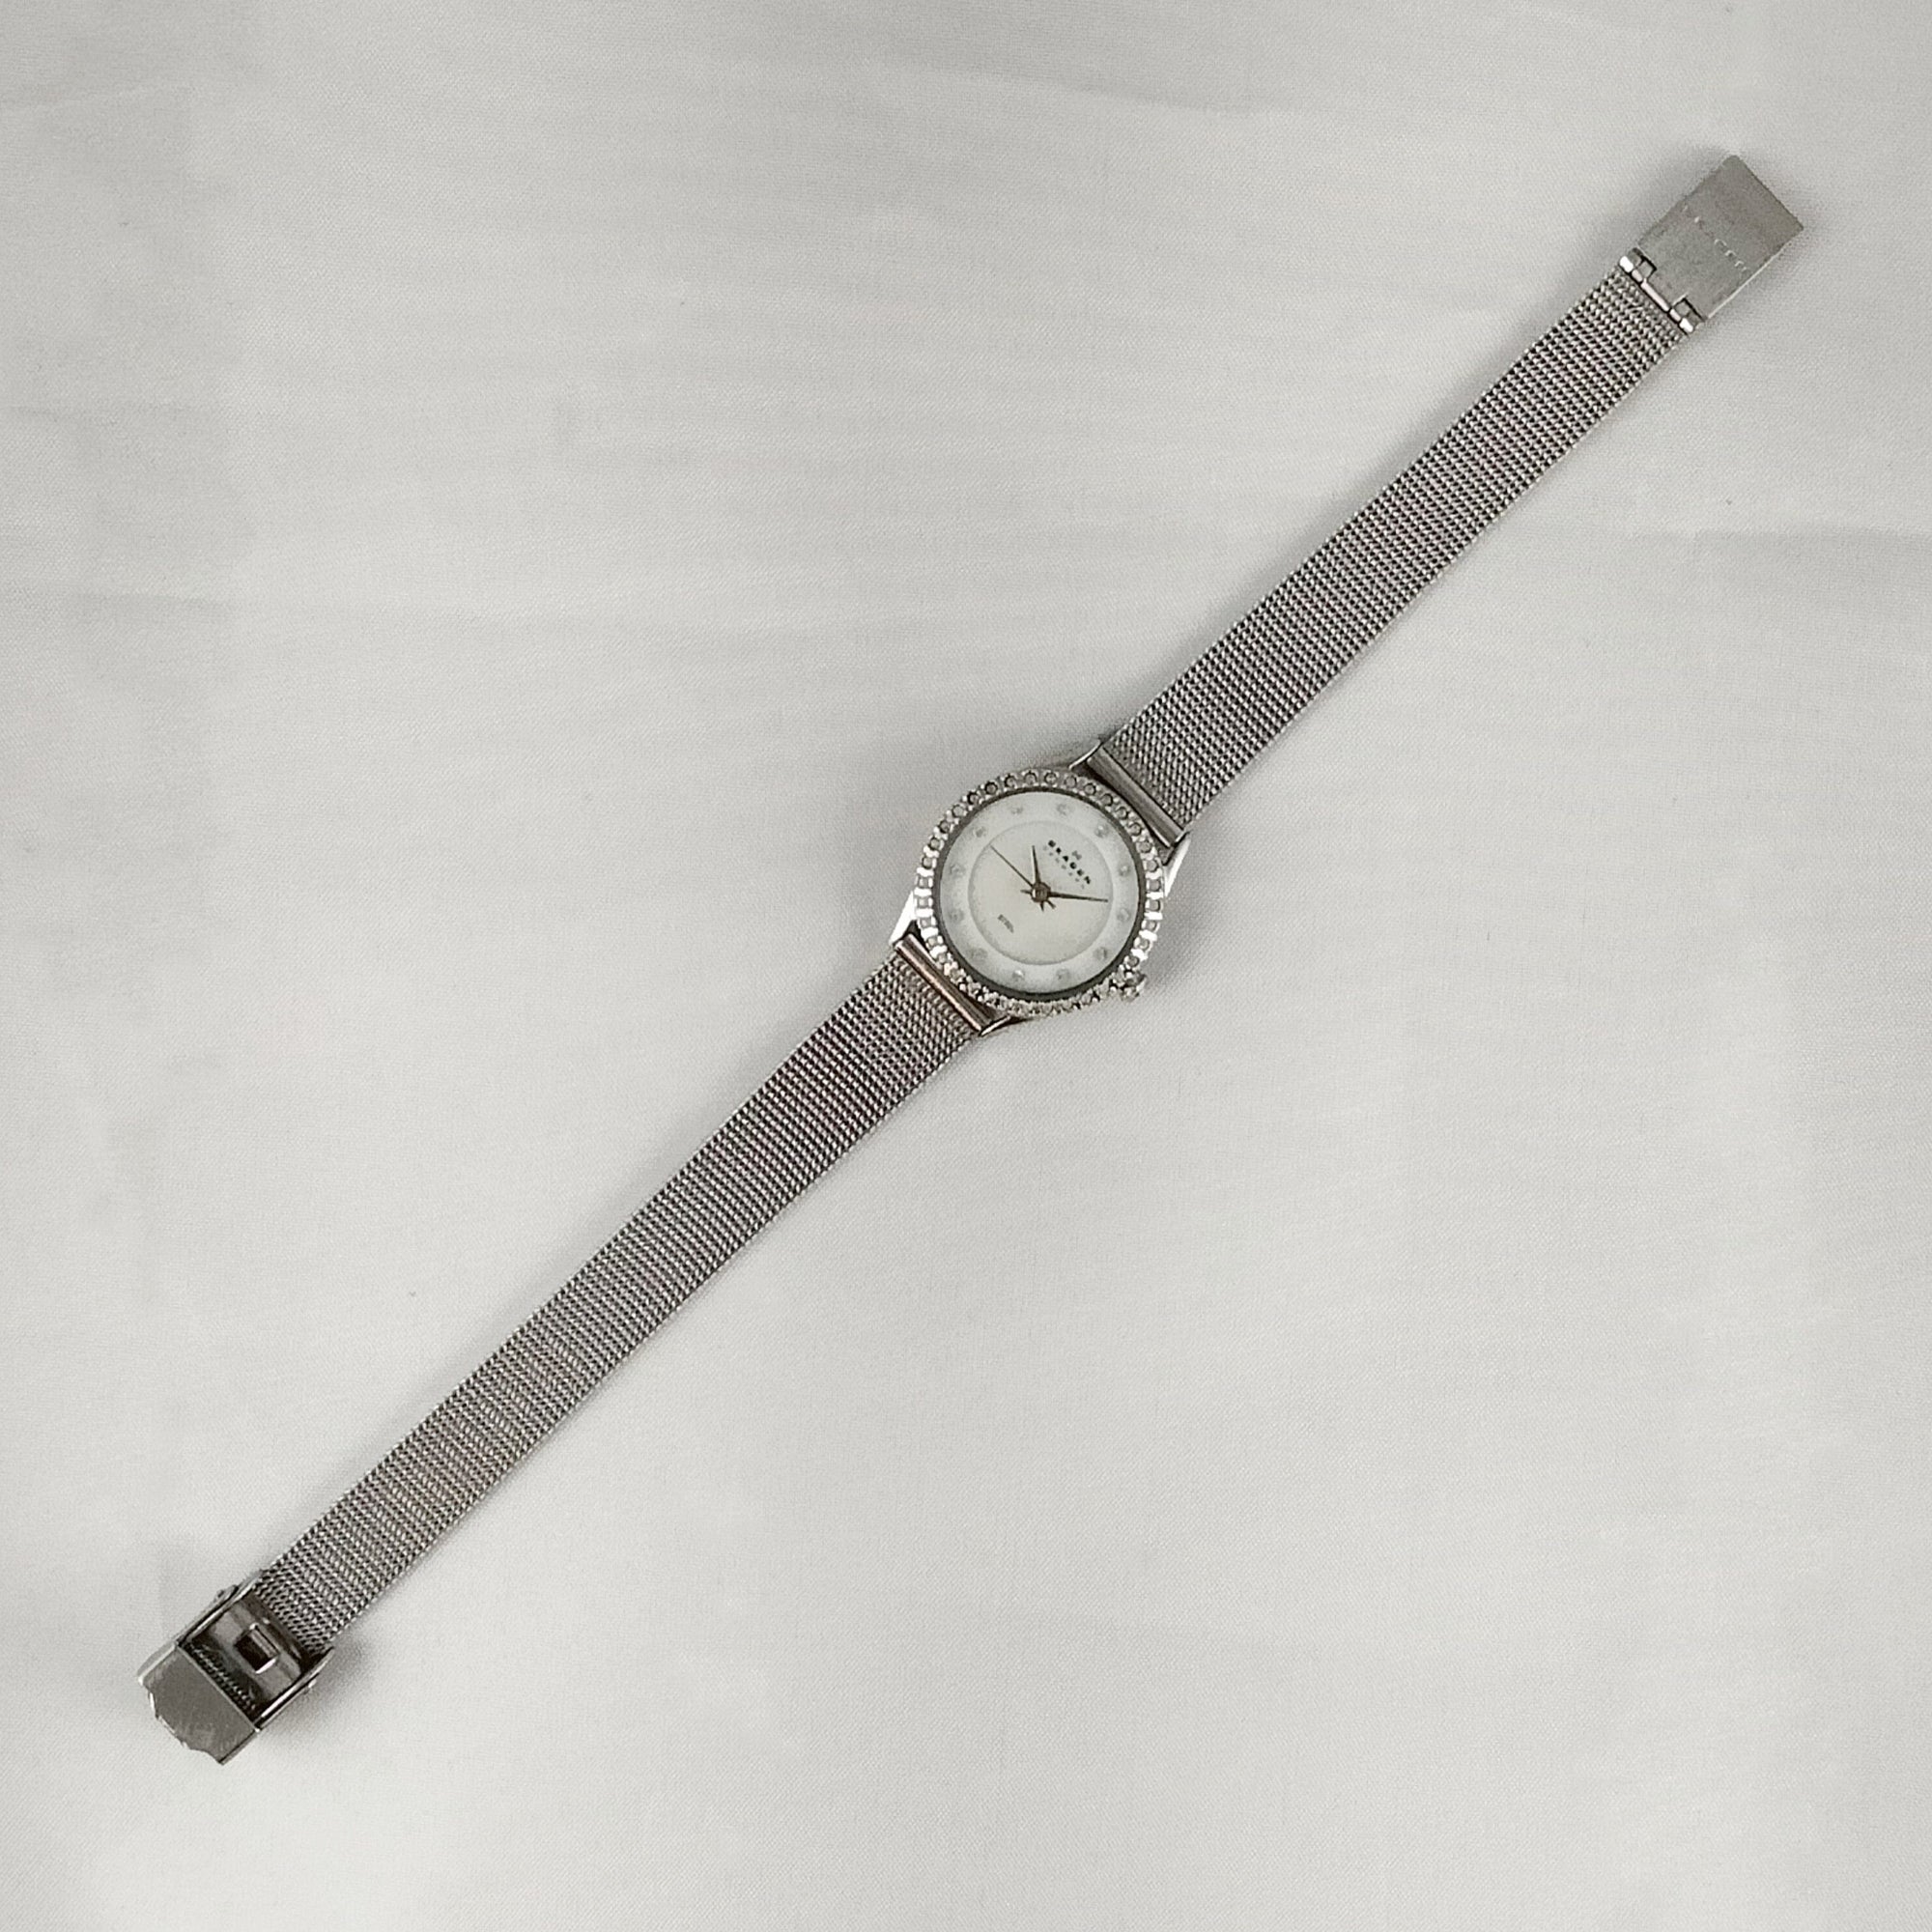 I Like Mikes Mid Century Modern Watches Skagen Stainless Steel Women's Watch, Jewel Details, Mother of Pearl Dial, Mesh Strap